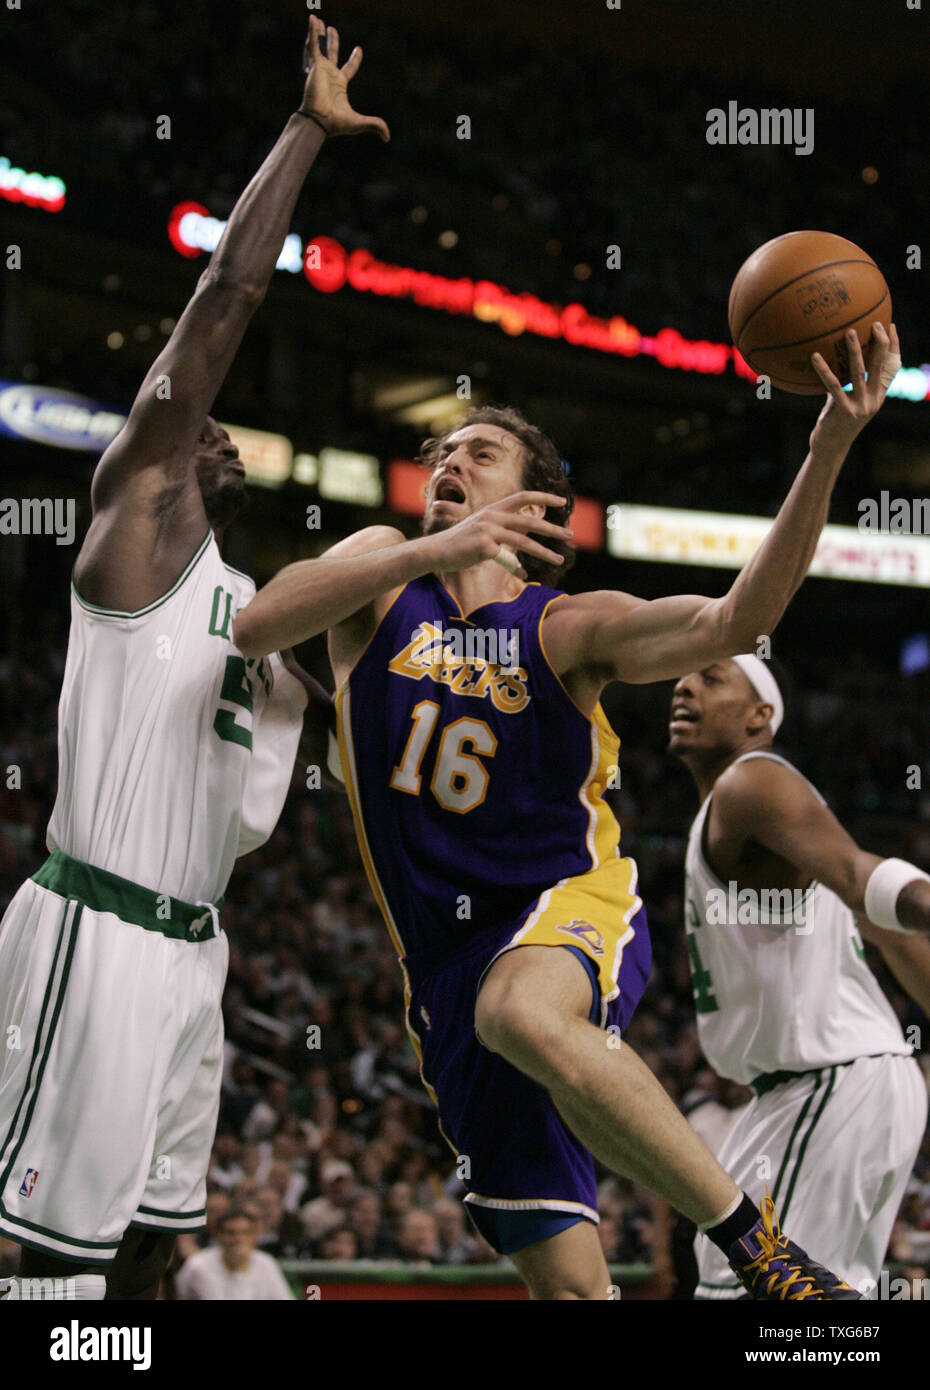 Los Angeles Lakers forward Pau Gasol (16) drives to the net past Boston Celtics forward Kevin Garnett (5) in the second half at the TD Garden in Boston, Massachusetts on January 31, 2010.  The Lakers defeated the Celtics 90-89.   UPI/Matthew Healey Stock Photo